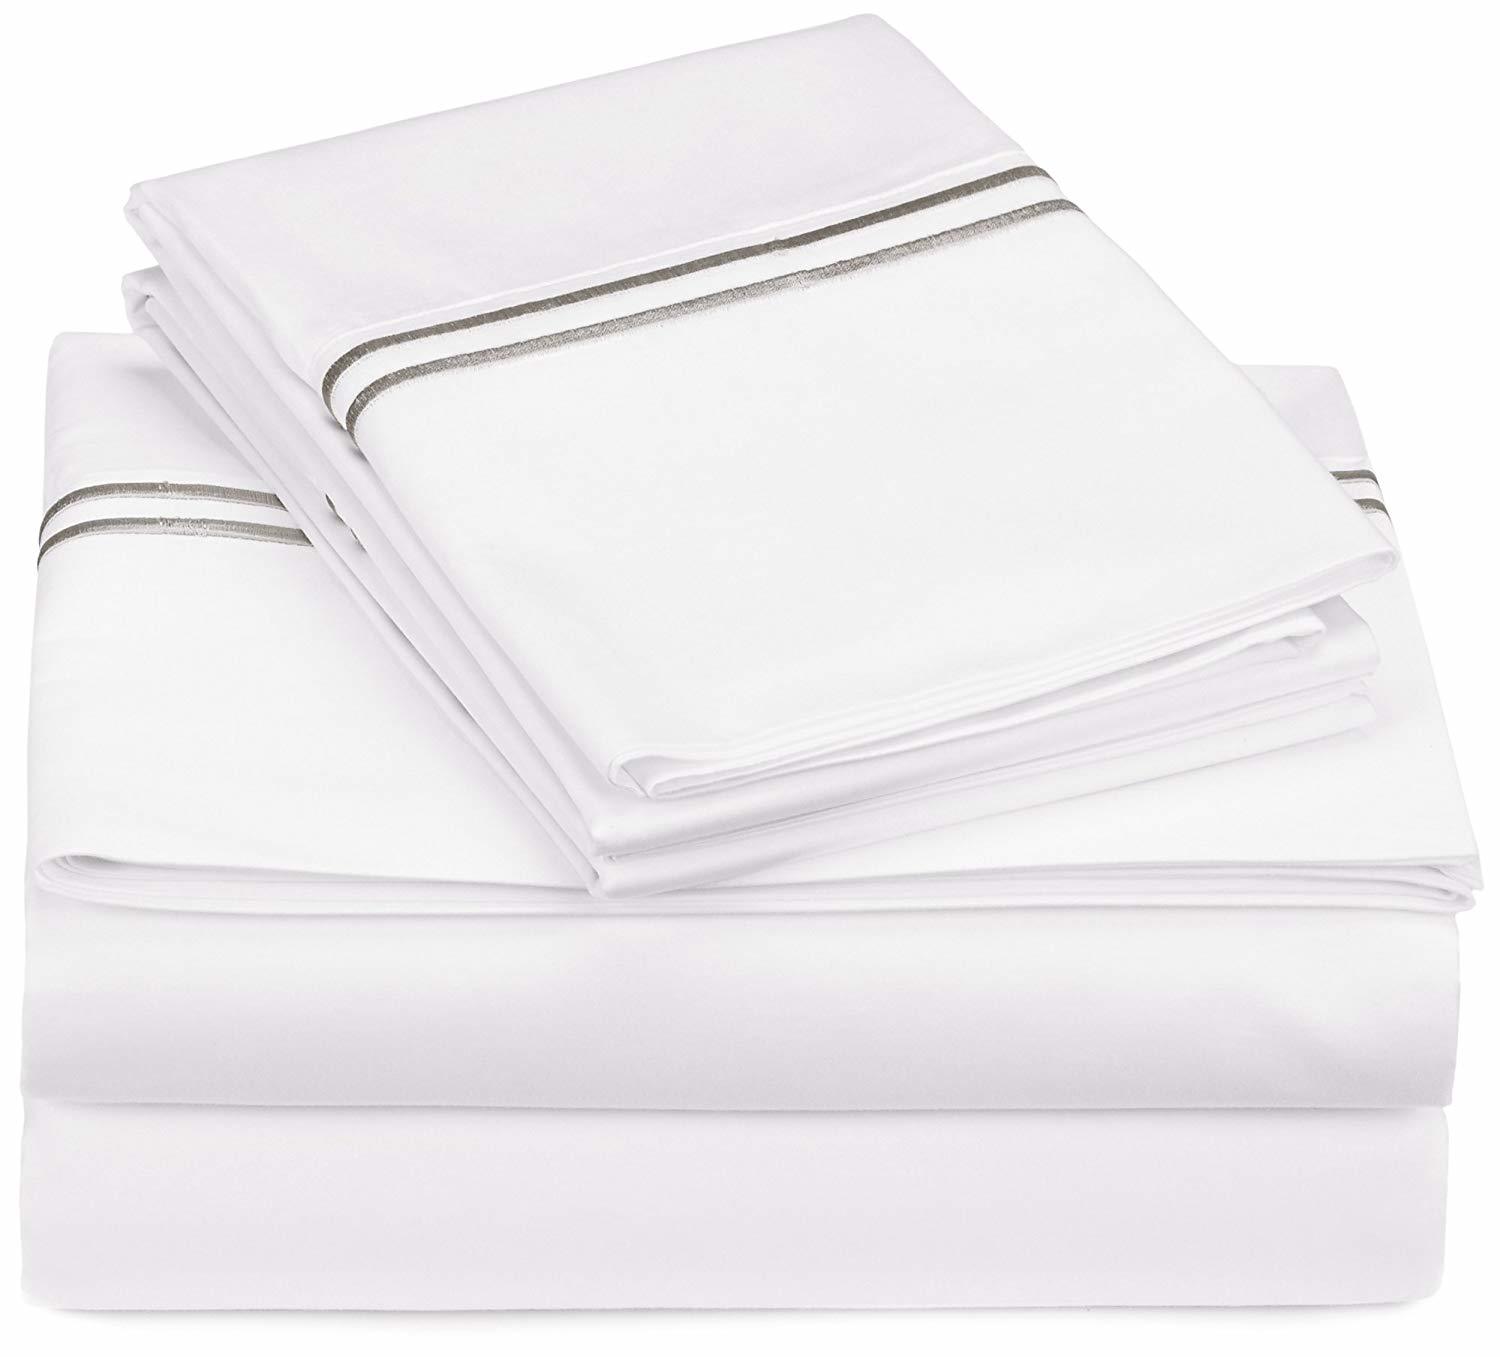 Best Hotel Quality Sheets In 2021 10 Top Rated Sheets